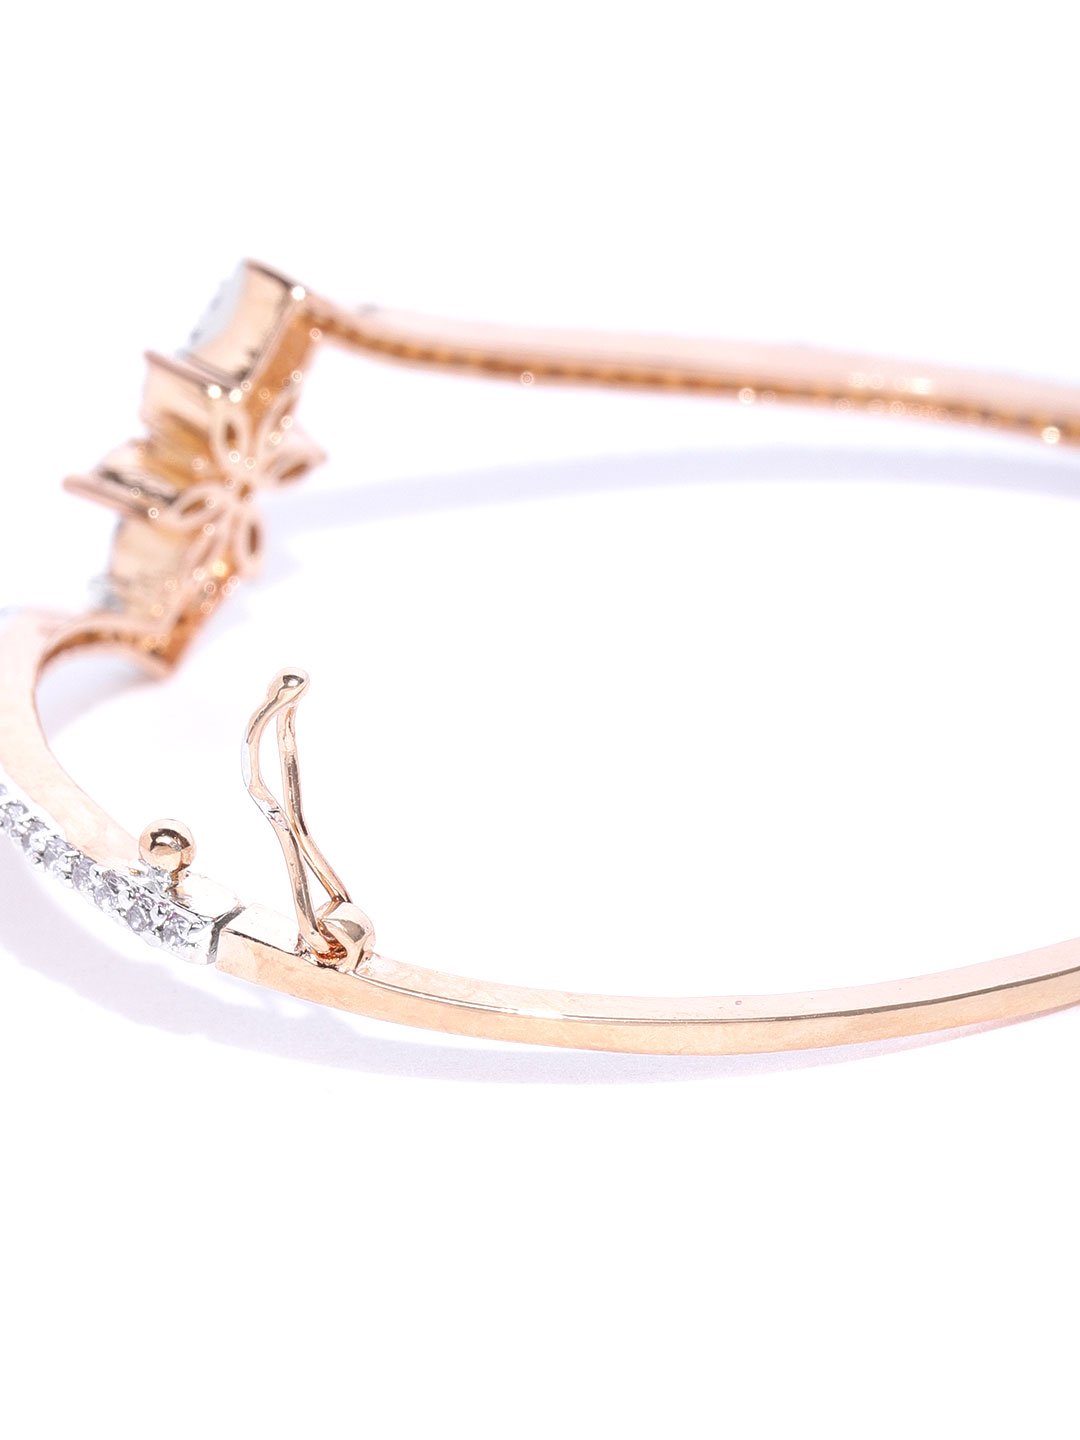 Women's Rose Gold-Plated American Diamond Studded Bracelet in Floral Pattern - Priyaasi